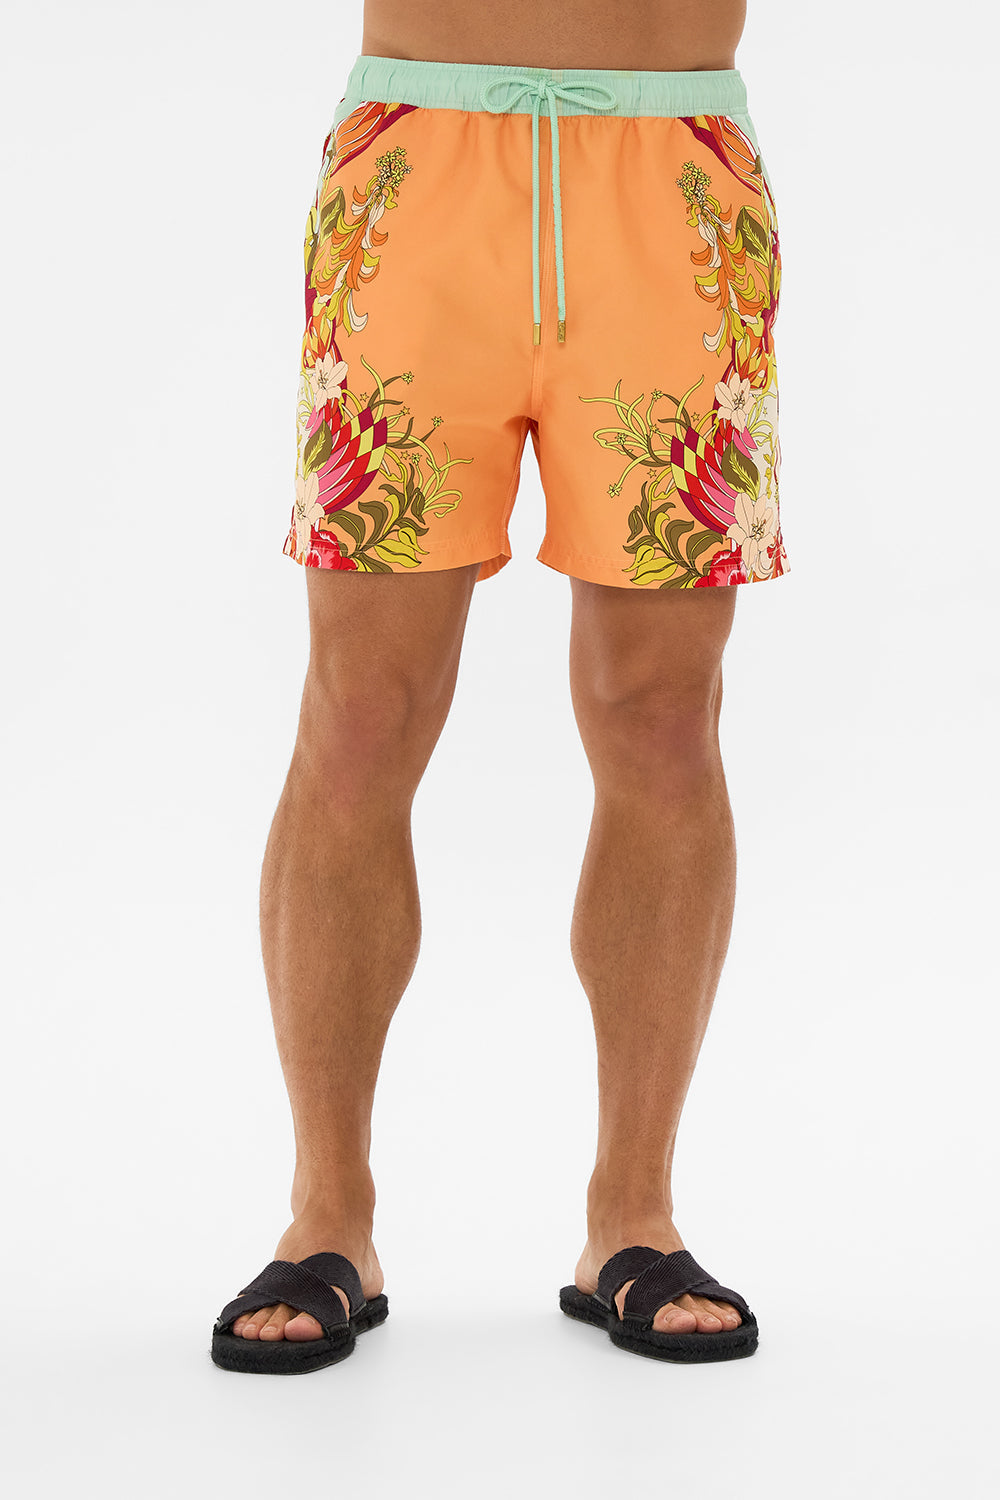 Hotel Franks by CAMILLA floral mid length boardshort in The Flower Child Society